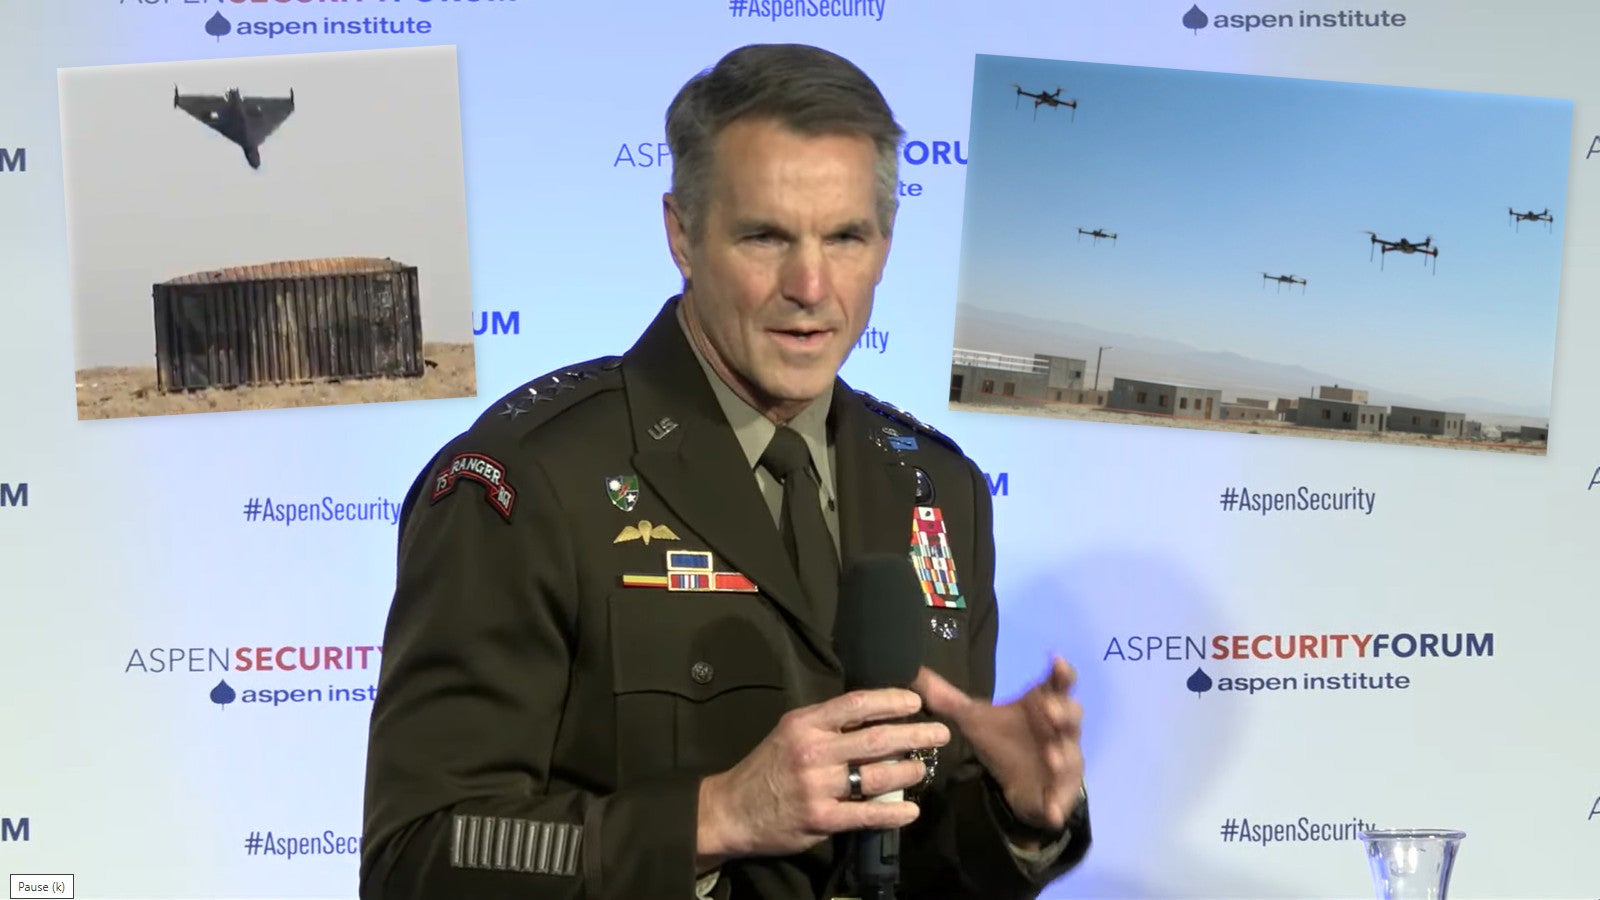 ‘I Never Had To Look Up’ Before: Top U.S. Special Ops General On Drone Threat